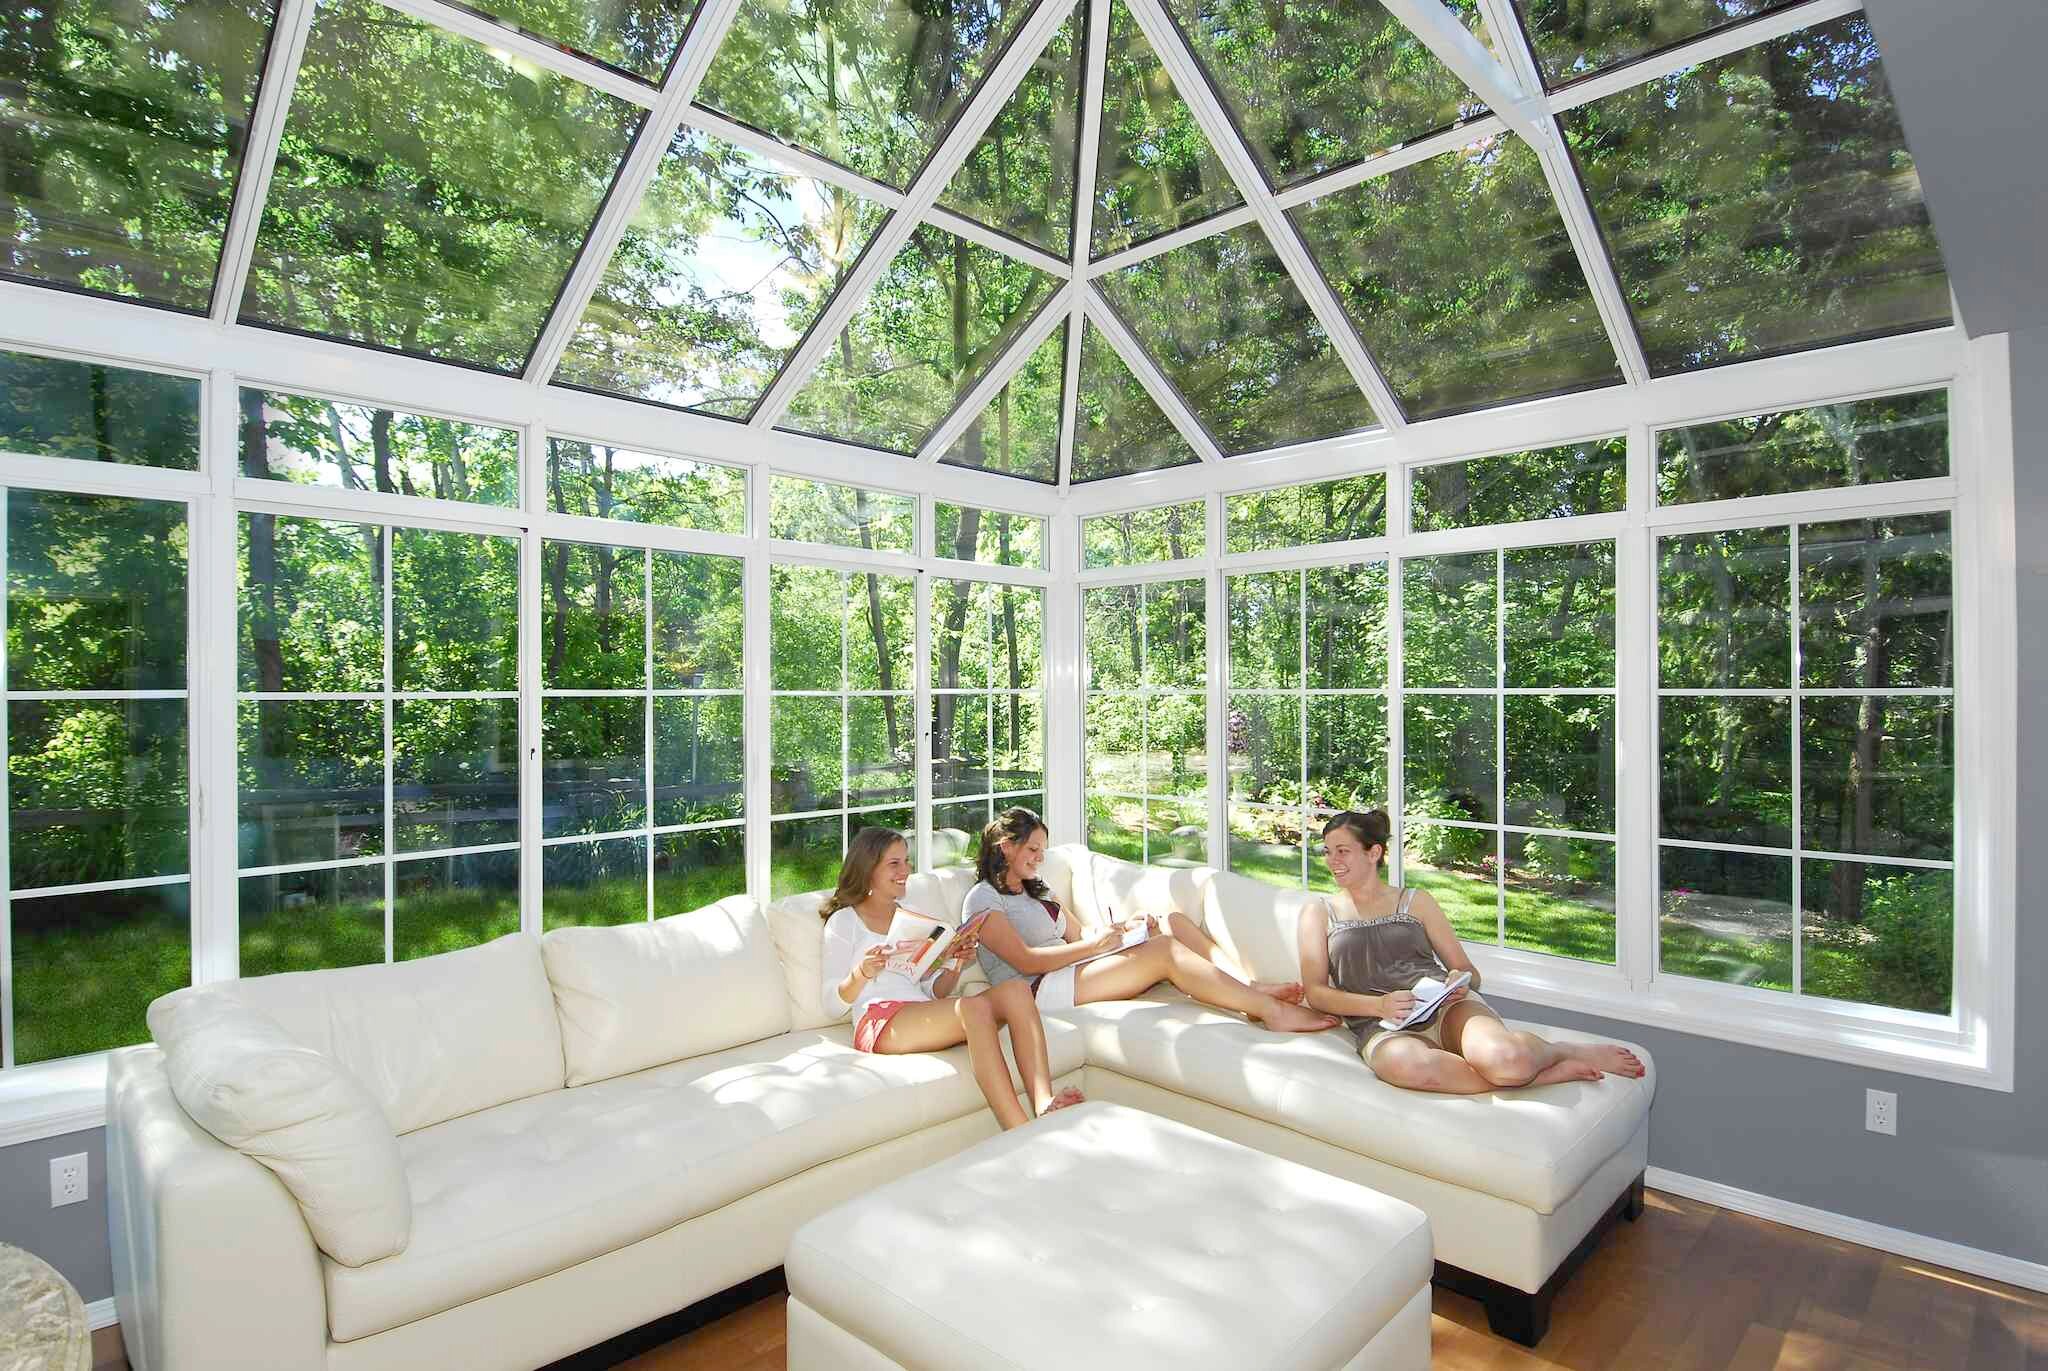 Contact us at sunroomscost.ca to see how much you need to spend to add a beautiful Sunroom to your home in the Greater Toronto Area!